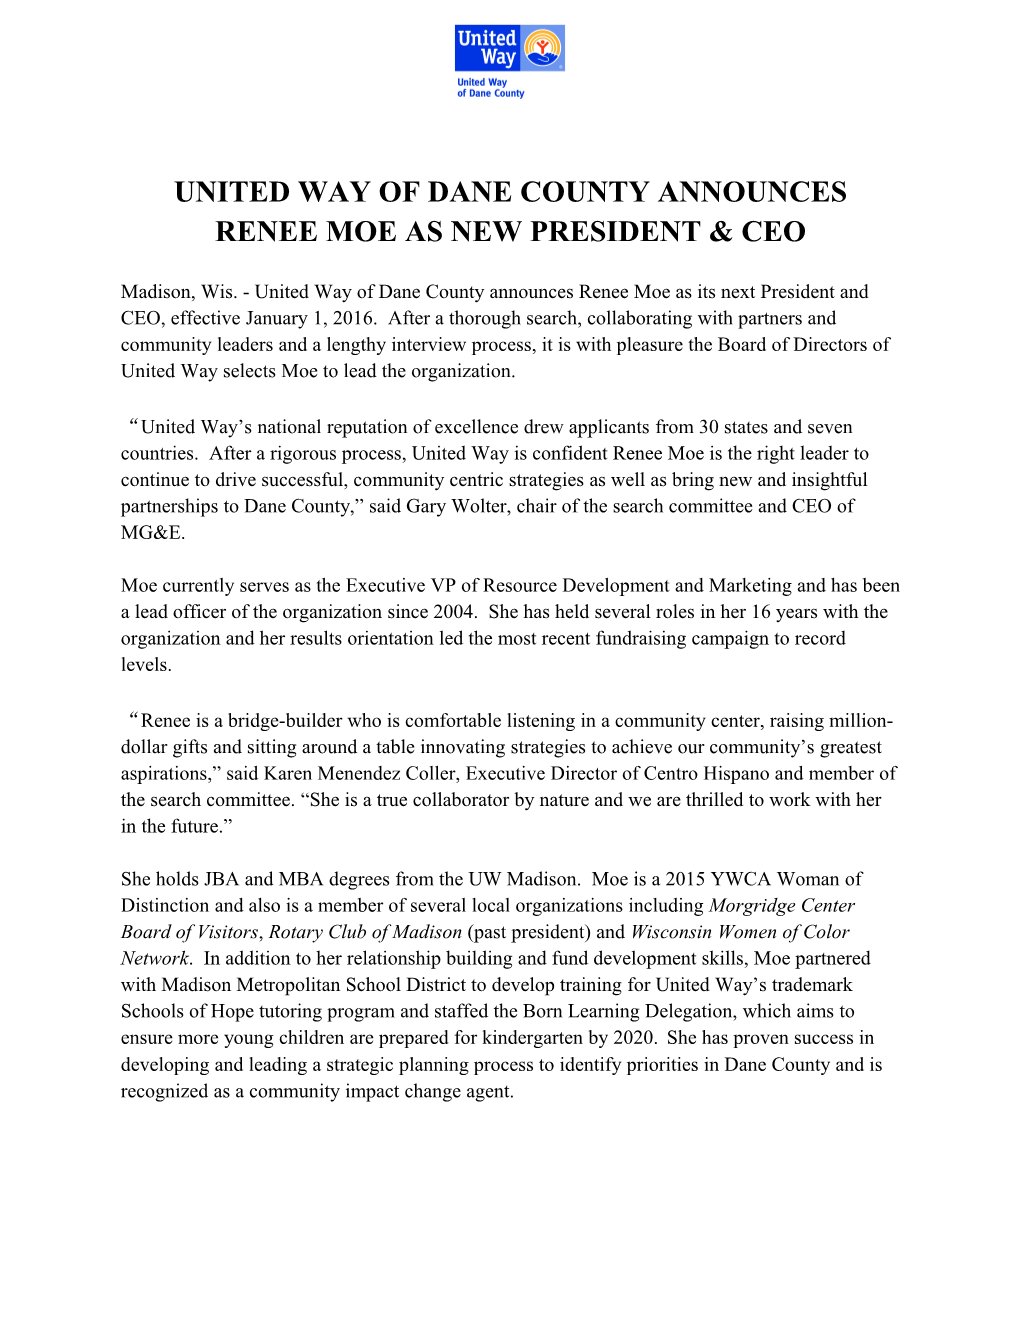 United Way of Dane County Announces Renee Moe As New President Ceo